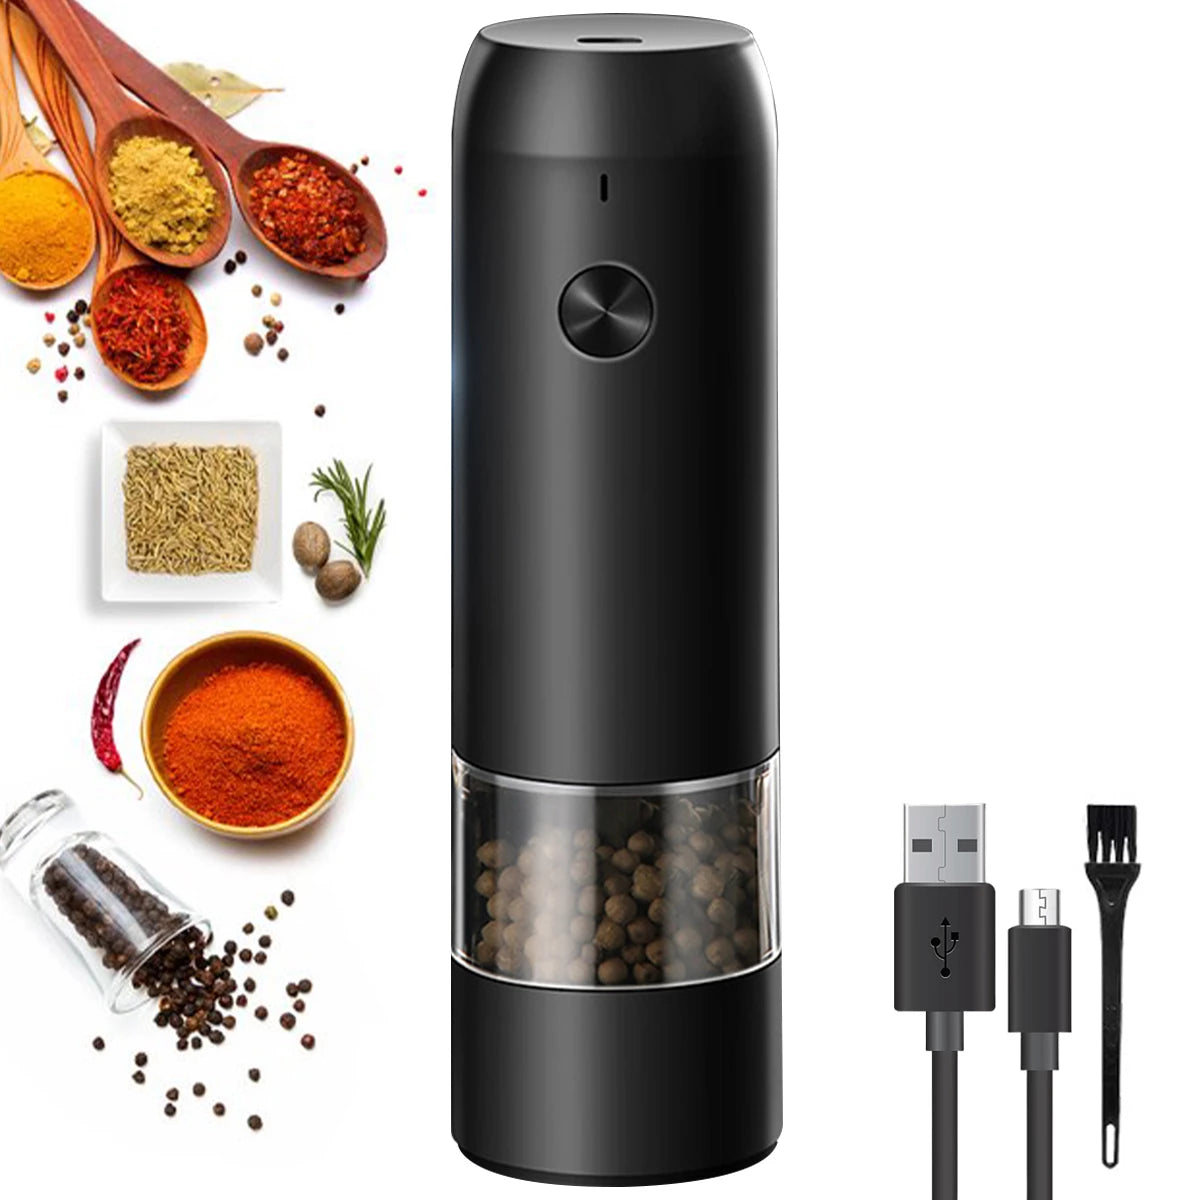 Rechargeable Electric Salt and Pepper Grinder Set